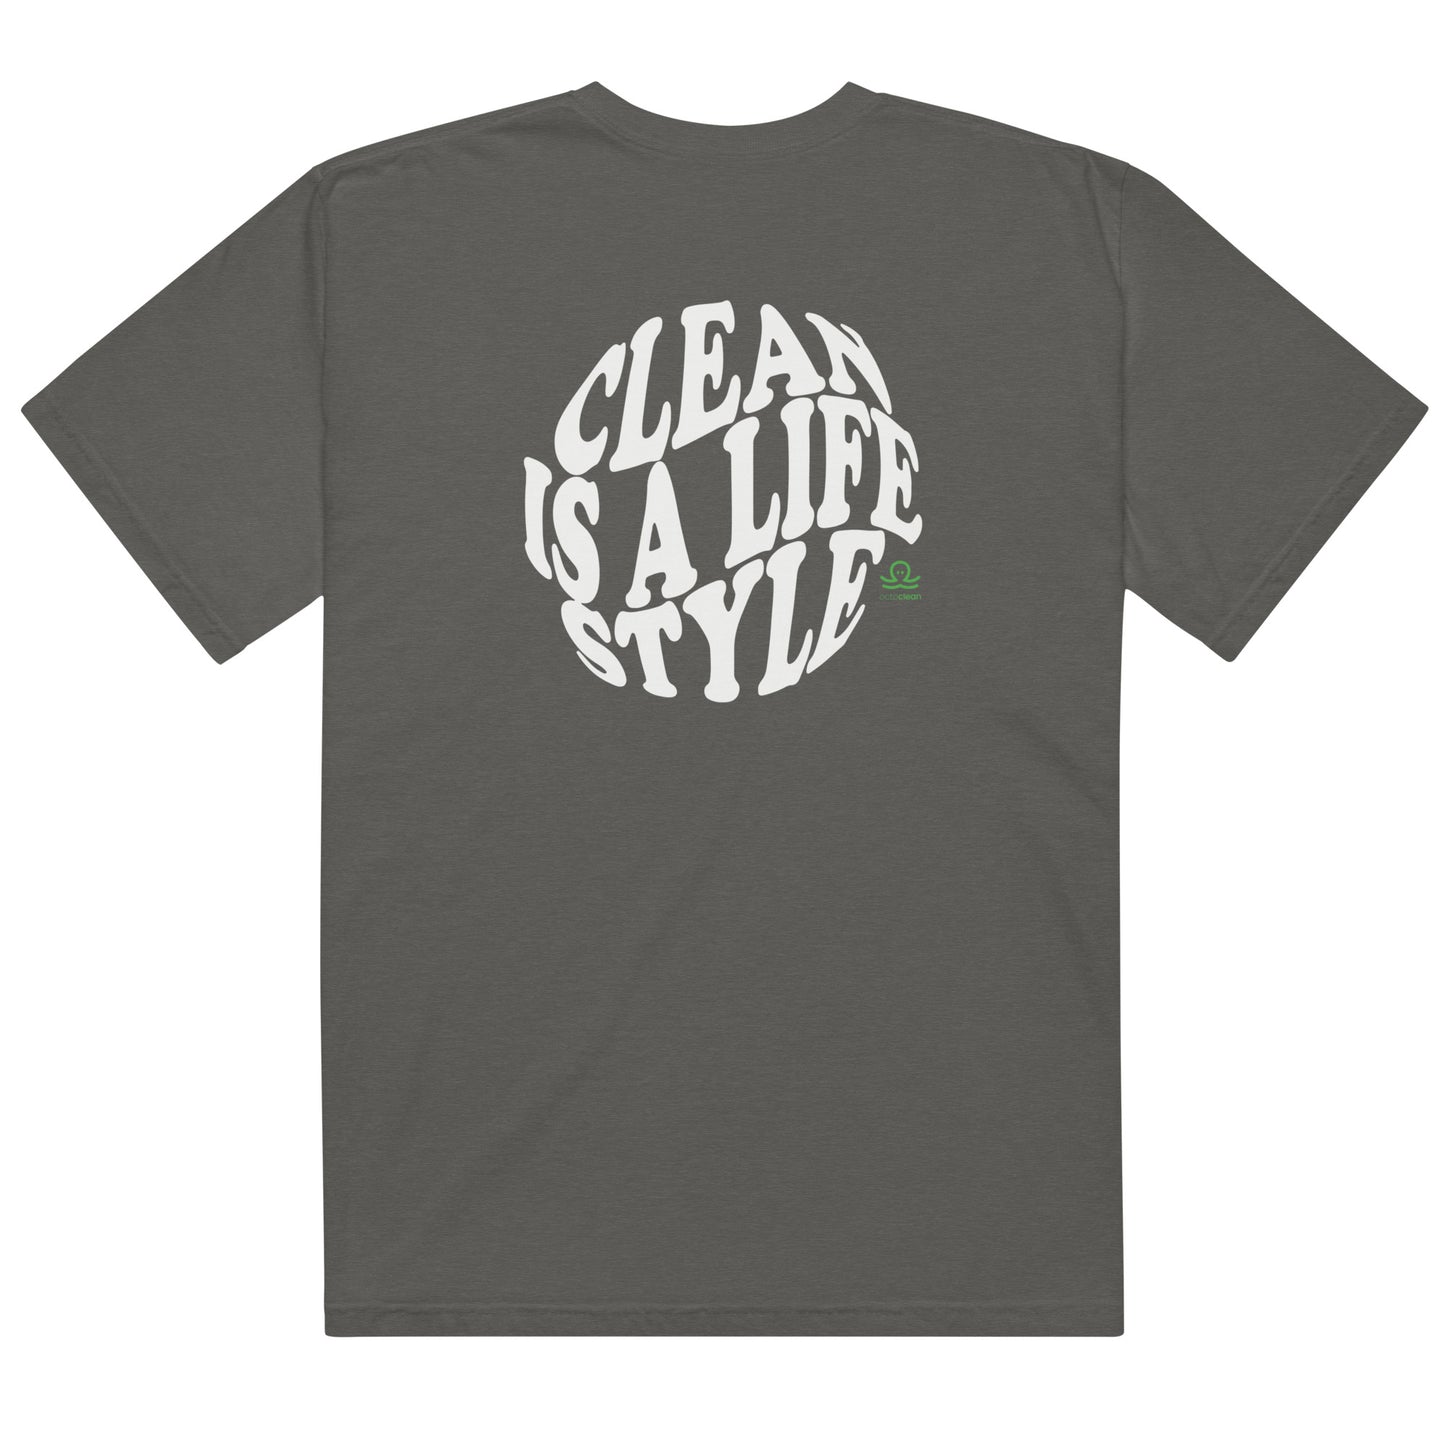 Clean is a Lifestyle T-shirt